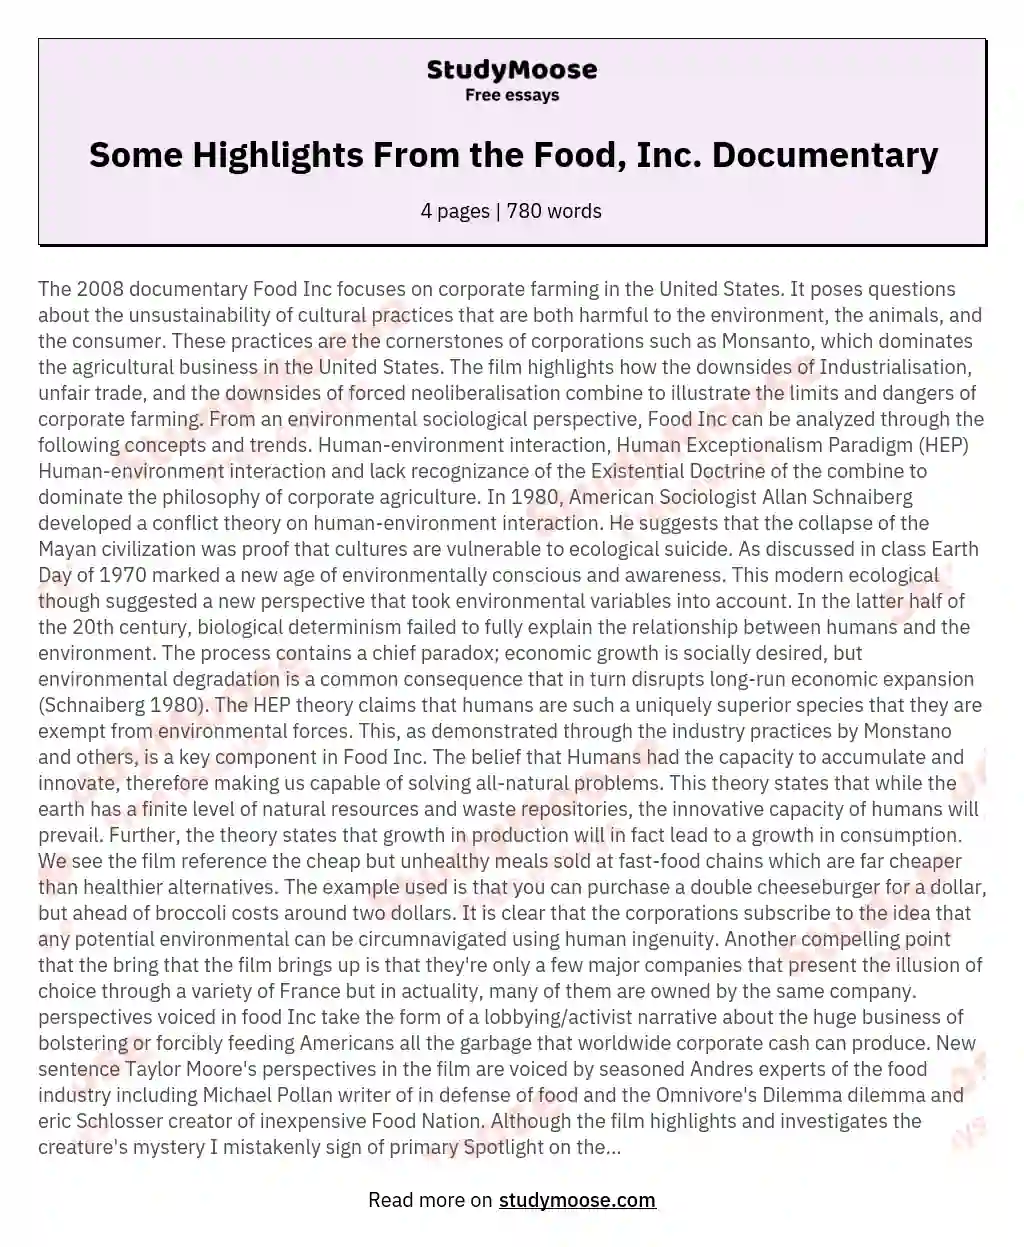 Some Highlights From the Food, Inc. Documentary essay